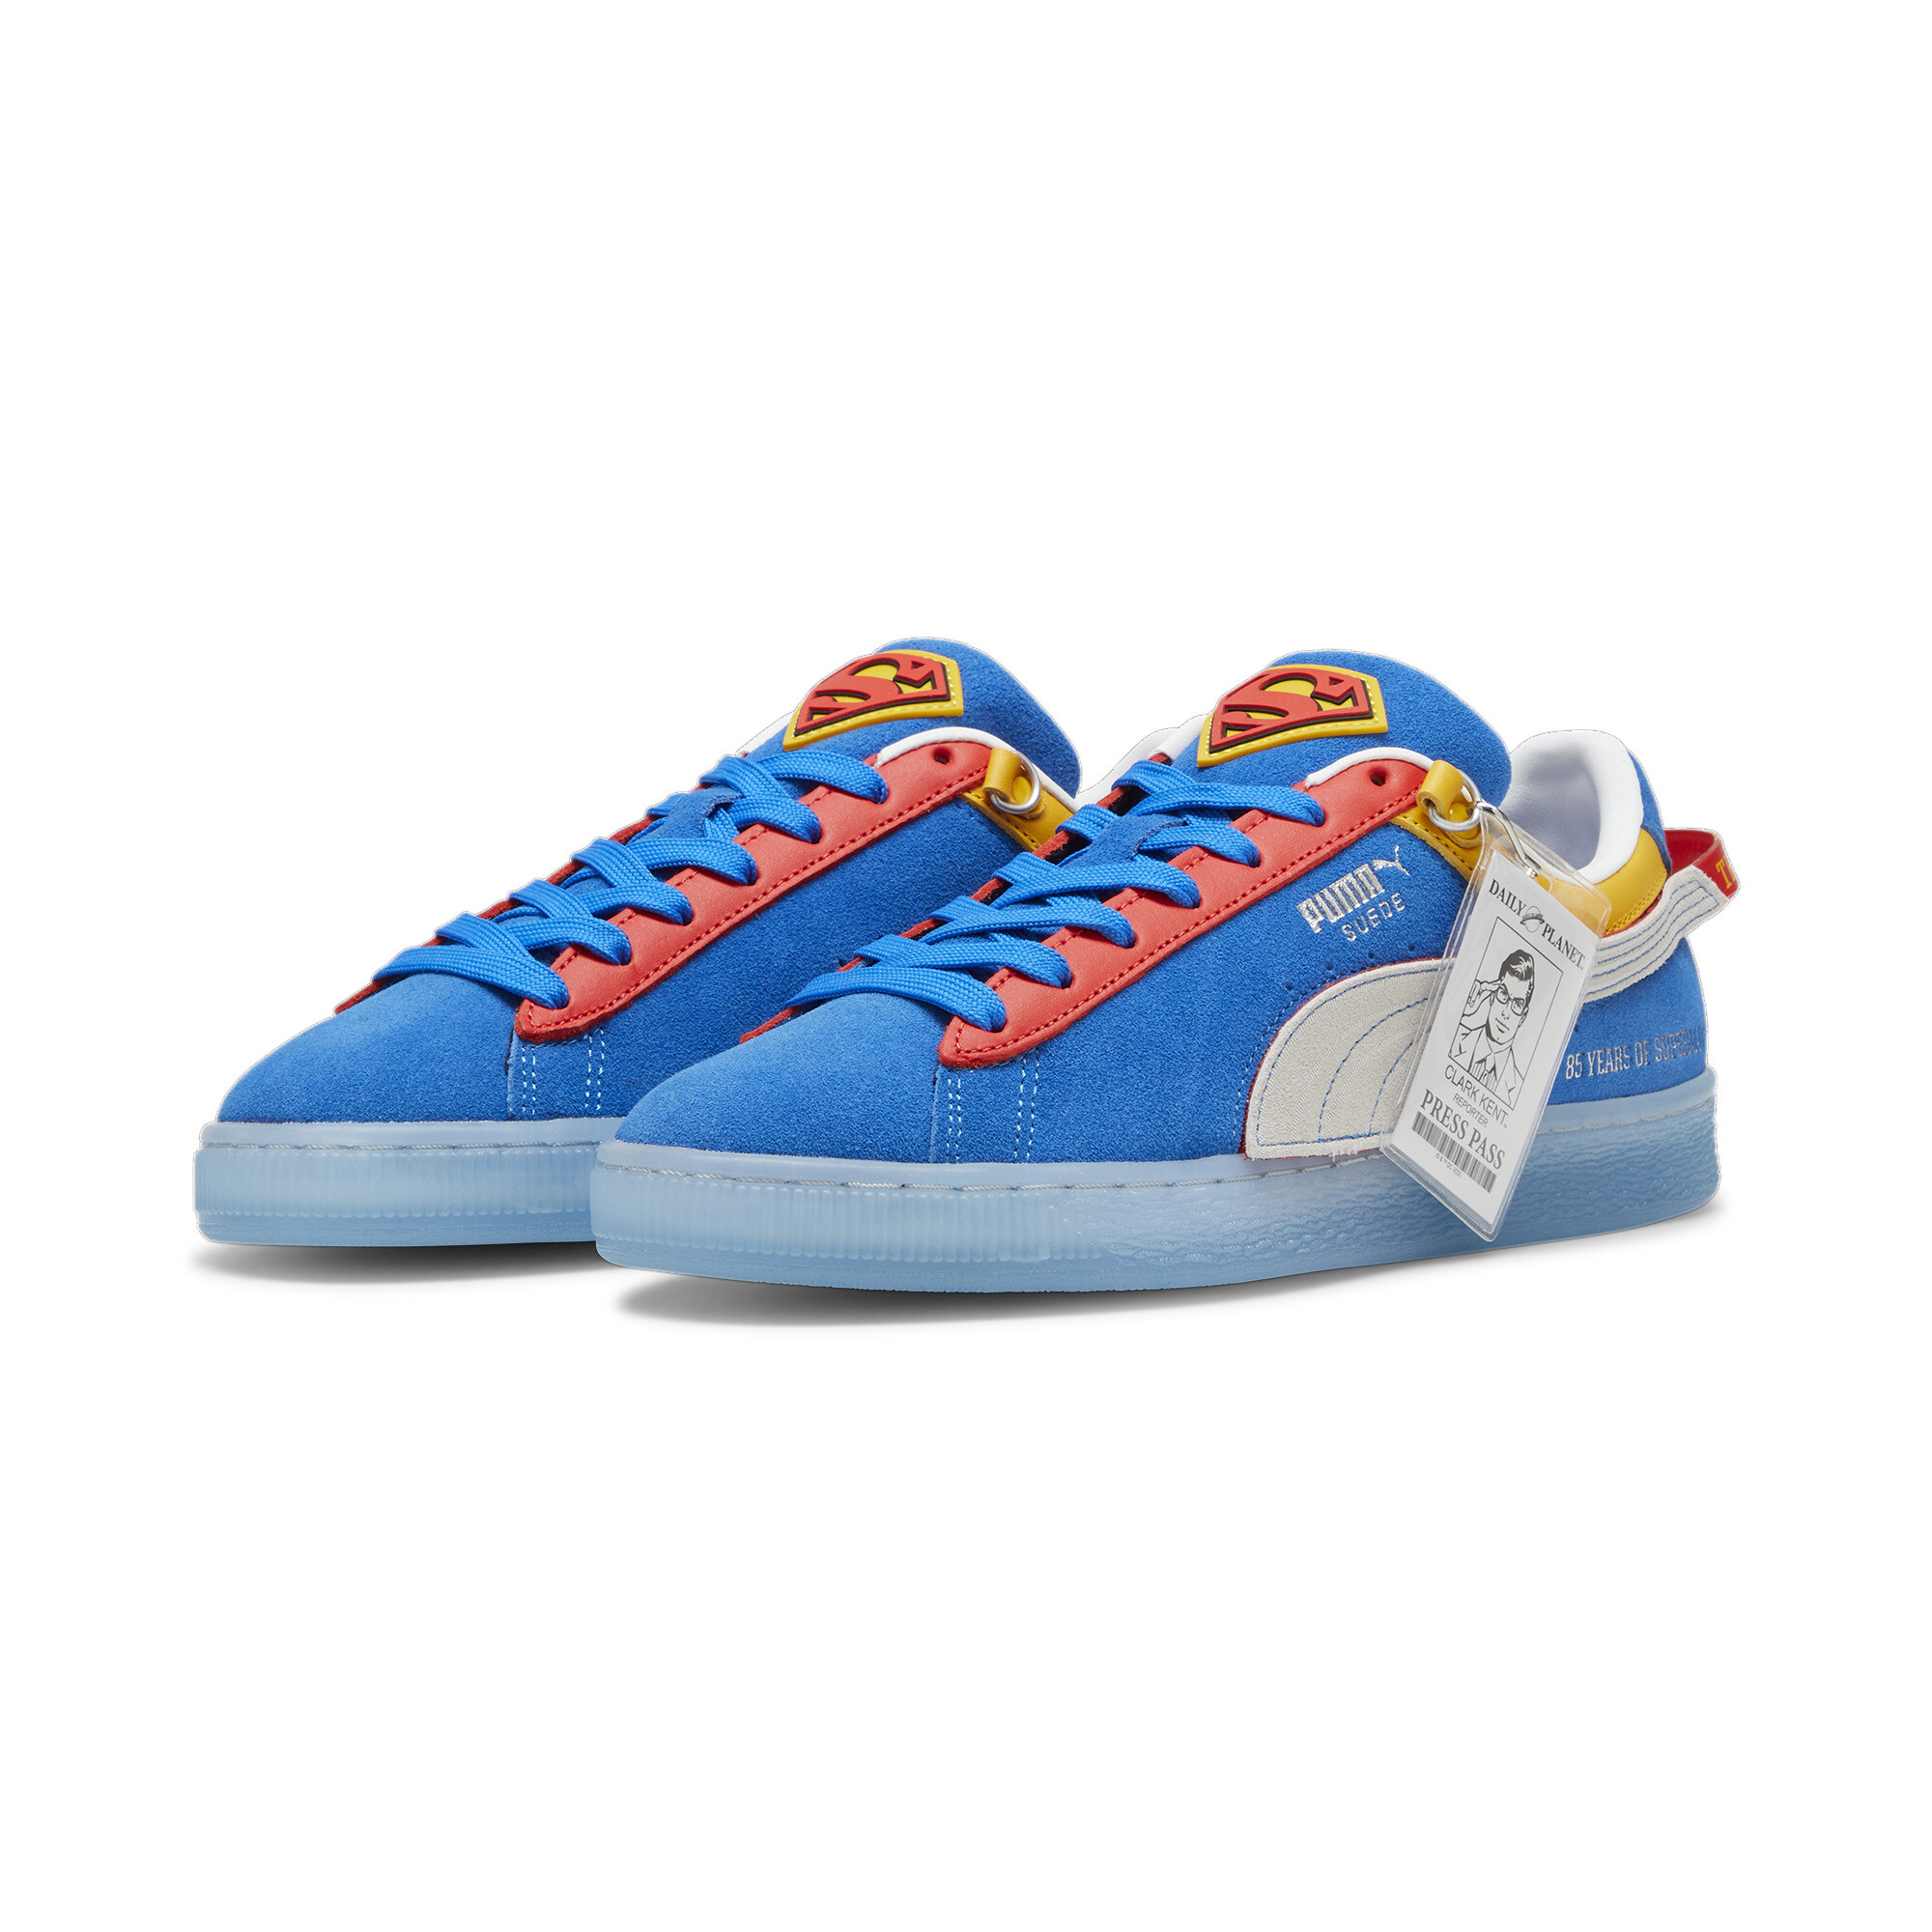 Puma X SUPERMAN 85th Anniversary Suede Sneakers, Blue, Size 44, Shoes